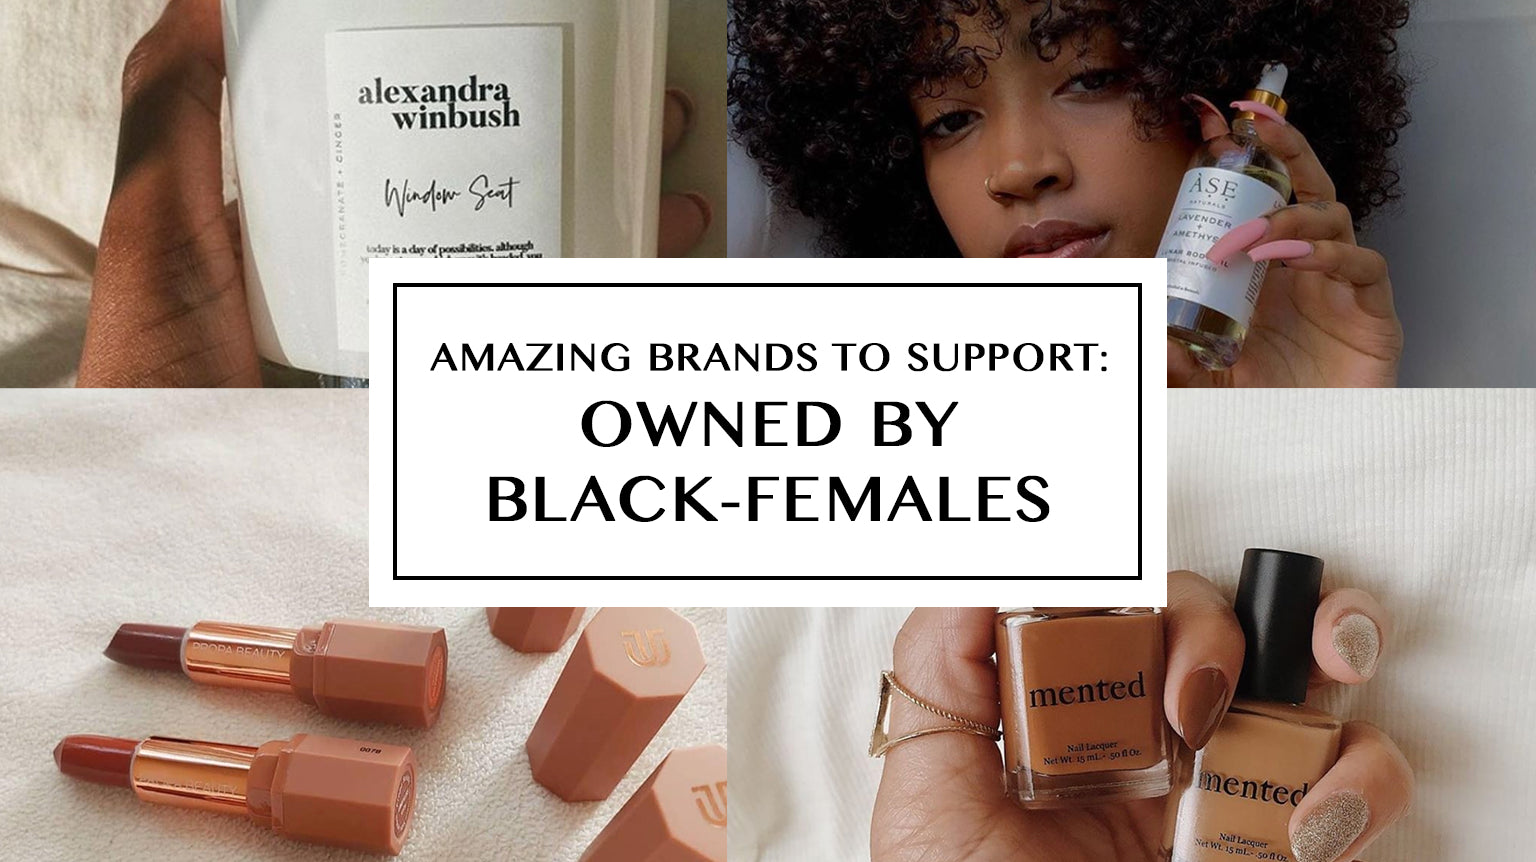 Here are Black Female-Owned Brands to Support